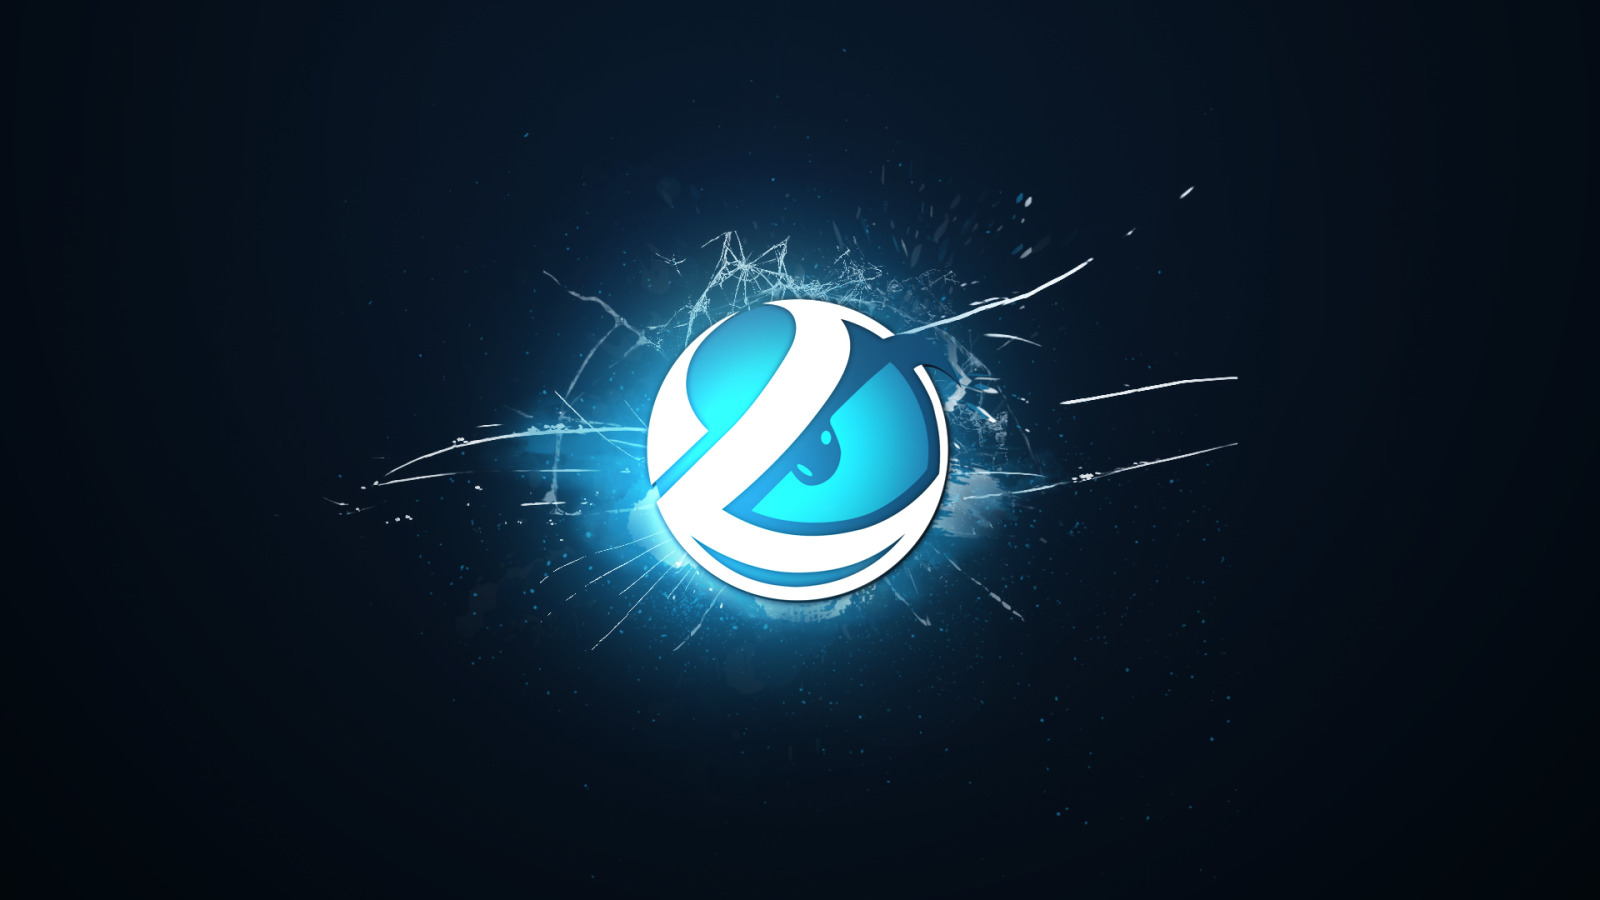 Download wallpaper logo, blue background, csgo, crack, cs go, Luminosity  Gaming, section games in resolution 1600x900